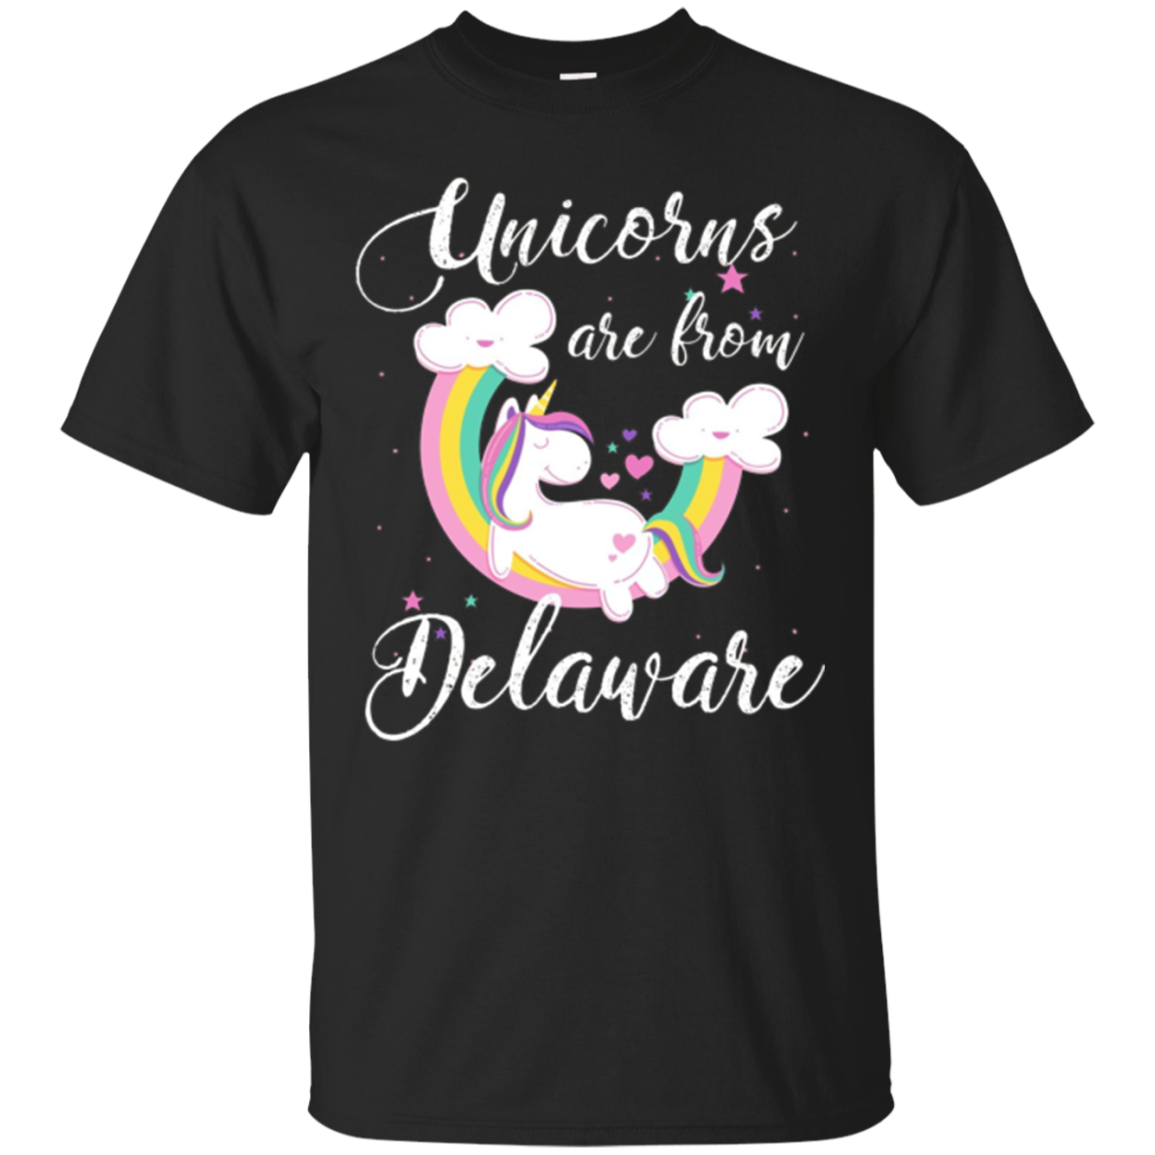 2018 Unicorns Are From Delaware T-shirt / Funny Delaware Shirt